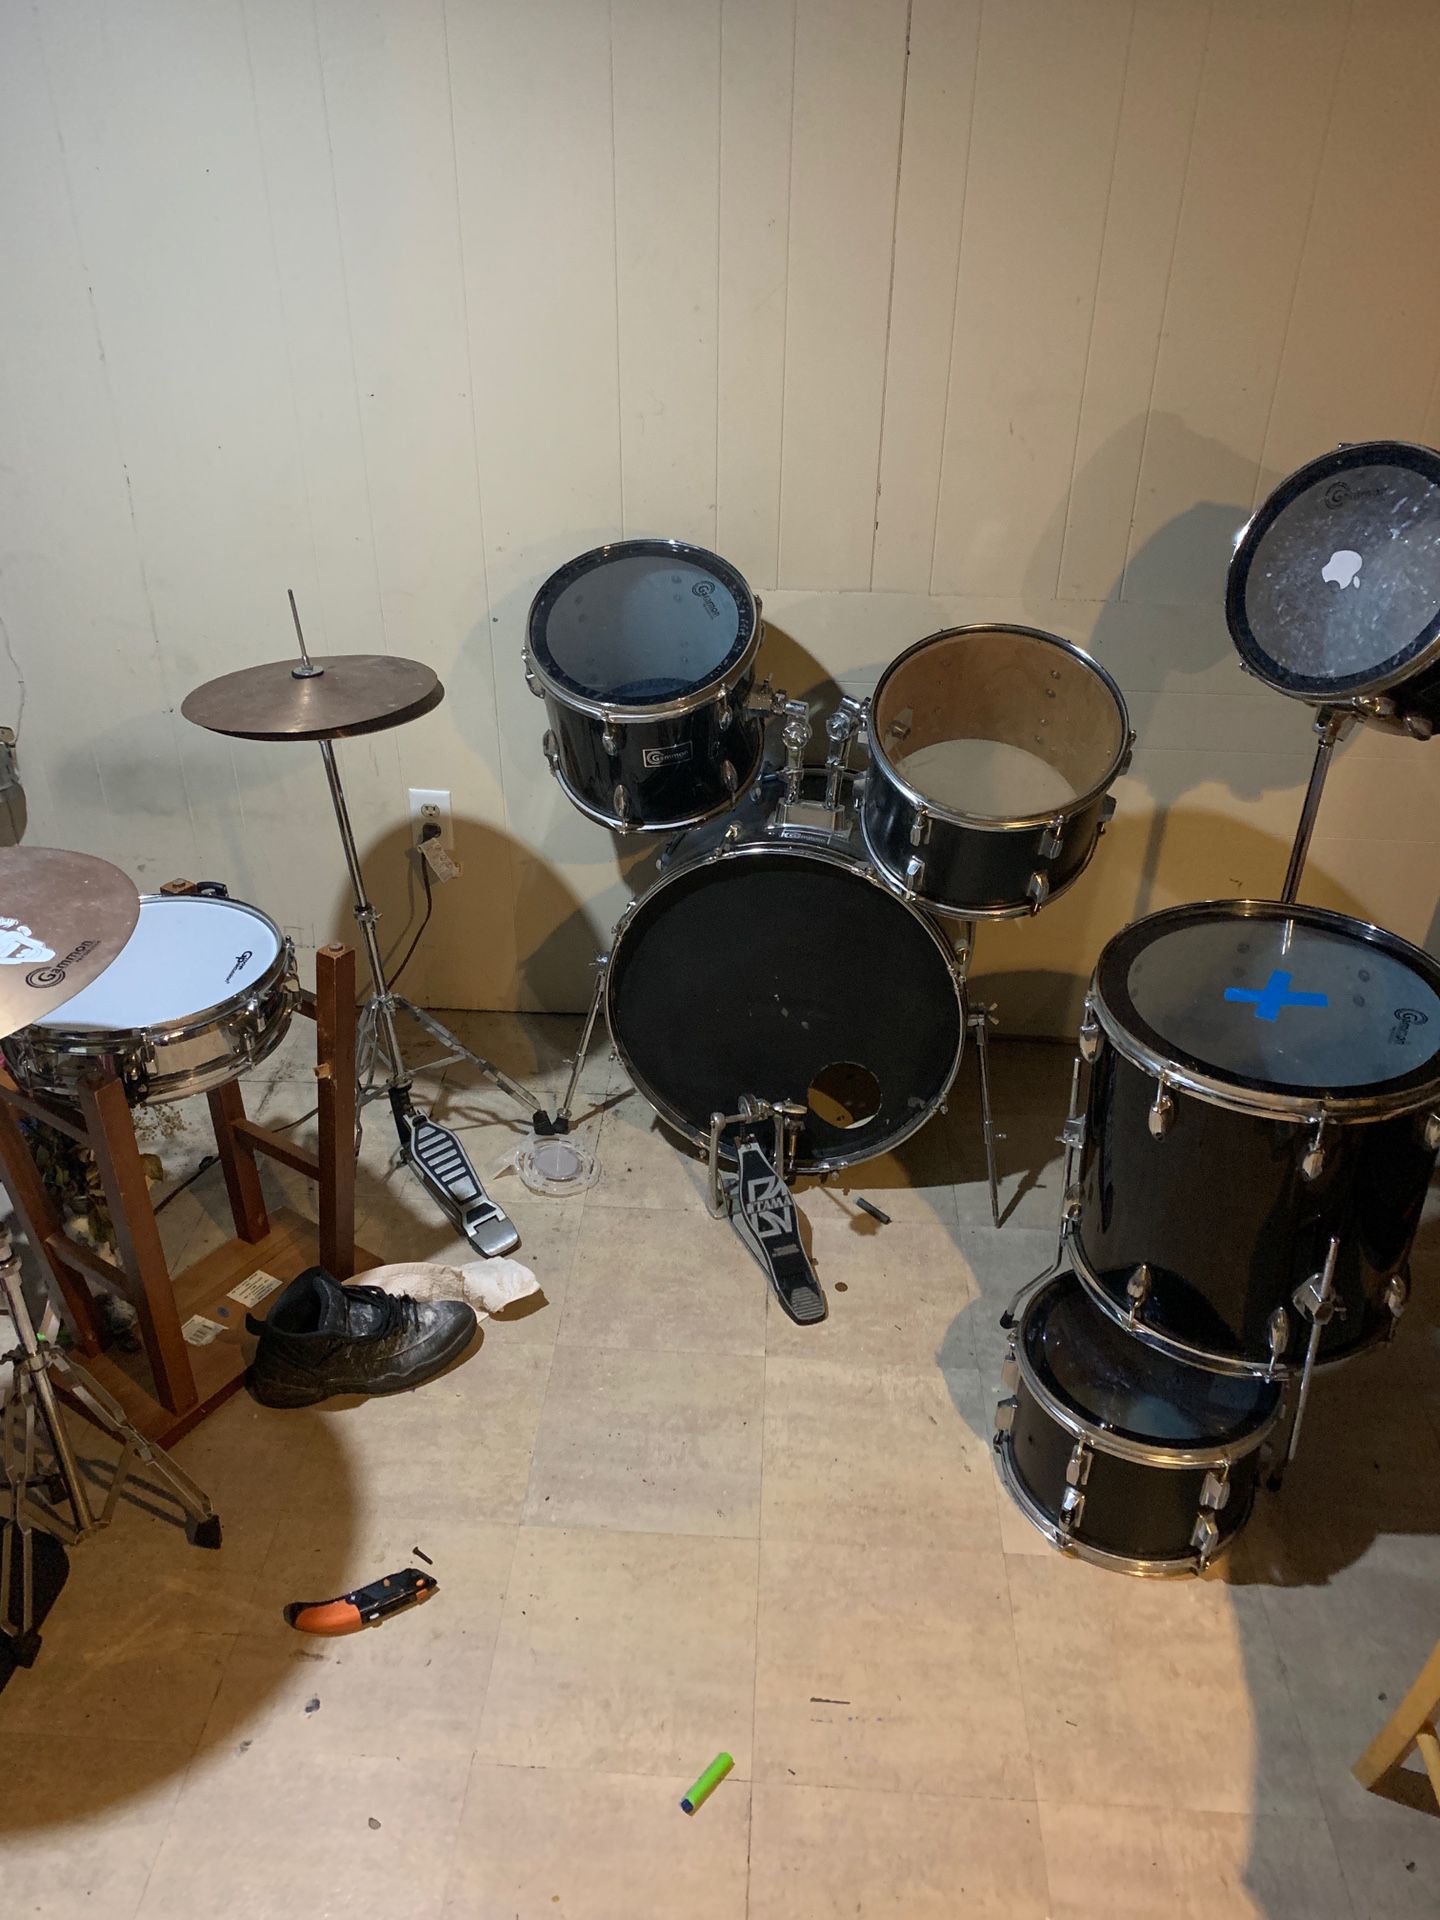 Pending pick up - Free drums